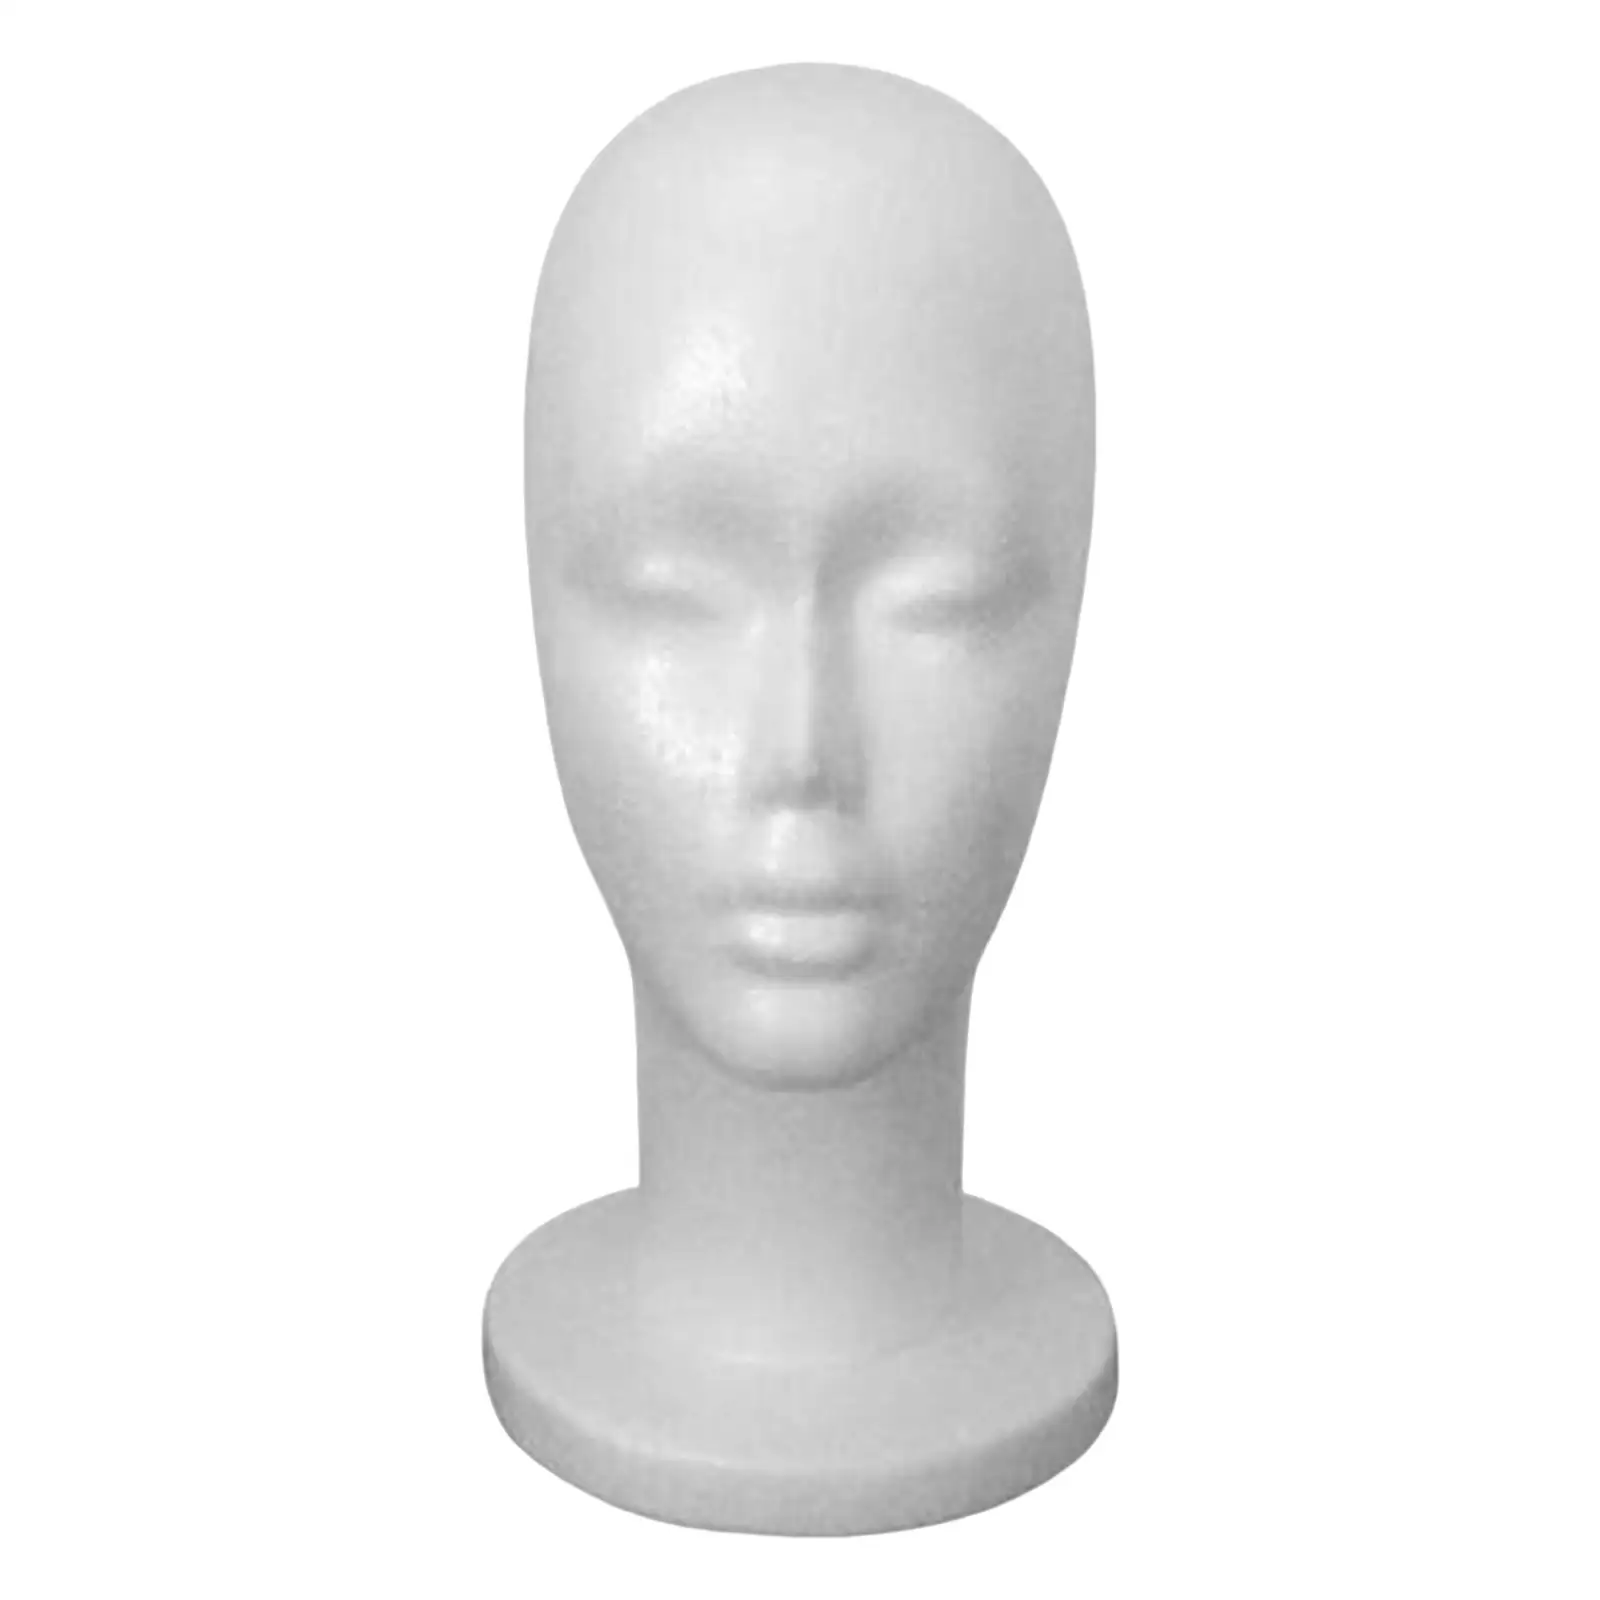 Female Foam Mannequin Head Model DIY Hat Glasses Holder White Versatile Uses for Professional or Personal Use 11.4 inch Tall